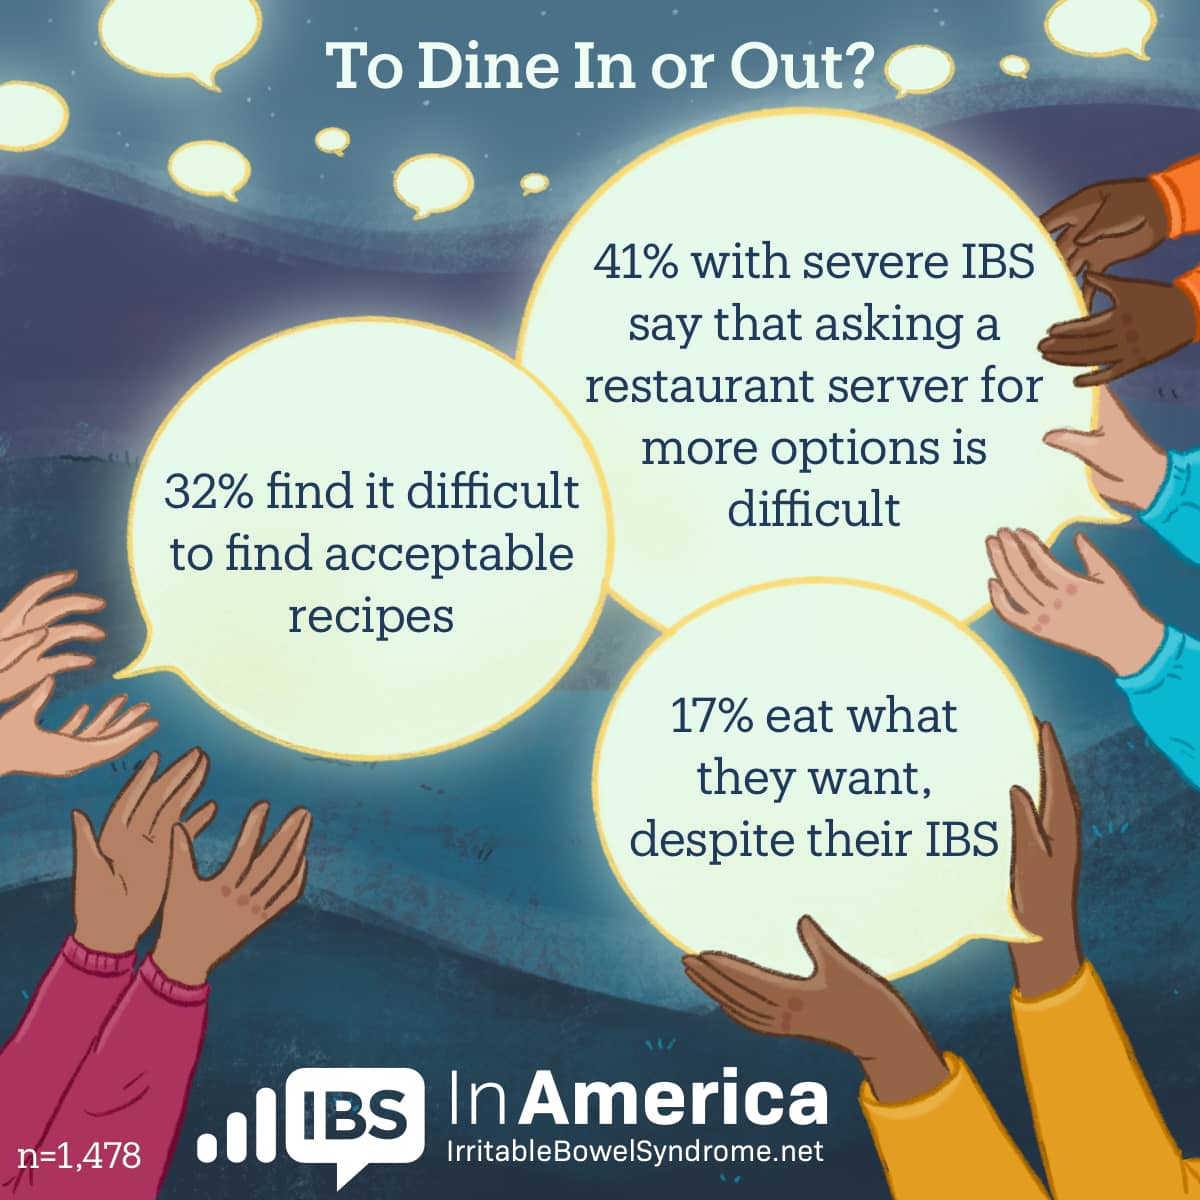 Hands raise up speech bubbles with statistics about how difficult it is for people with IBS to dine-in at restaurants.